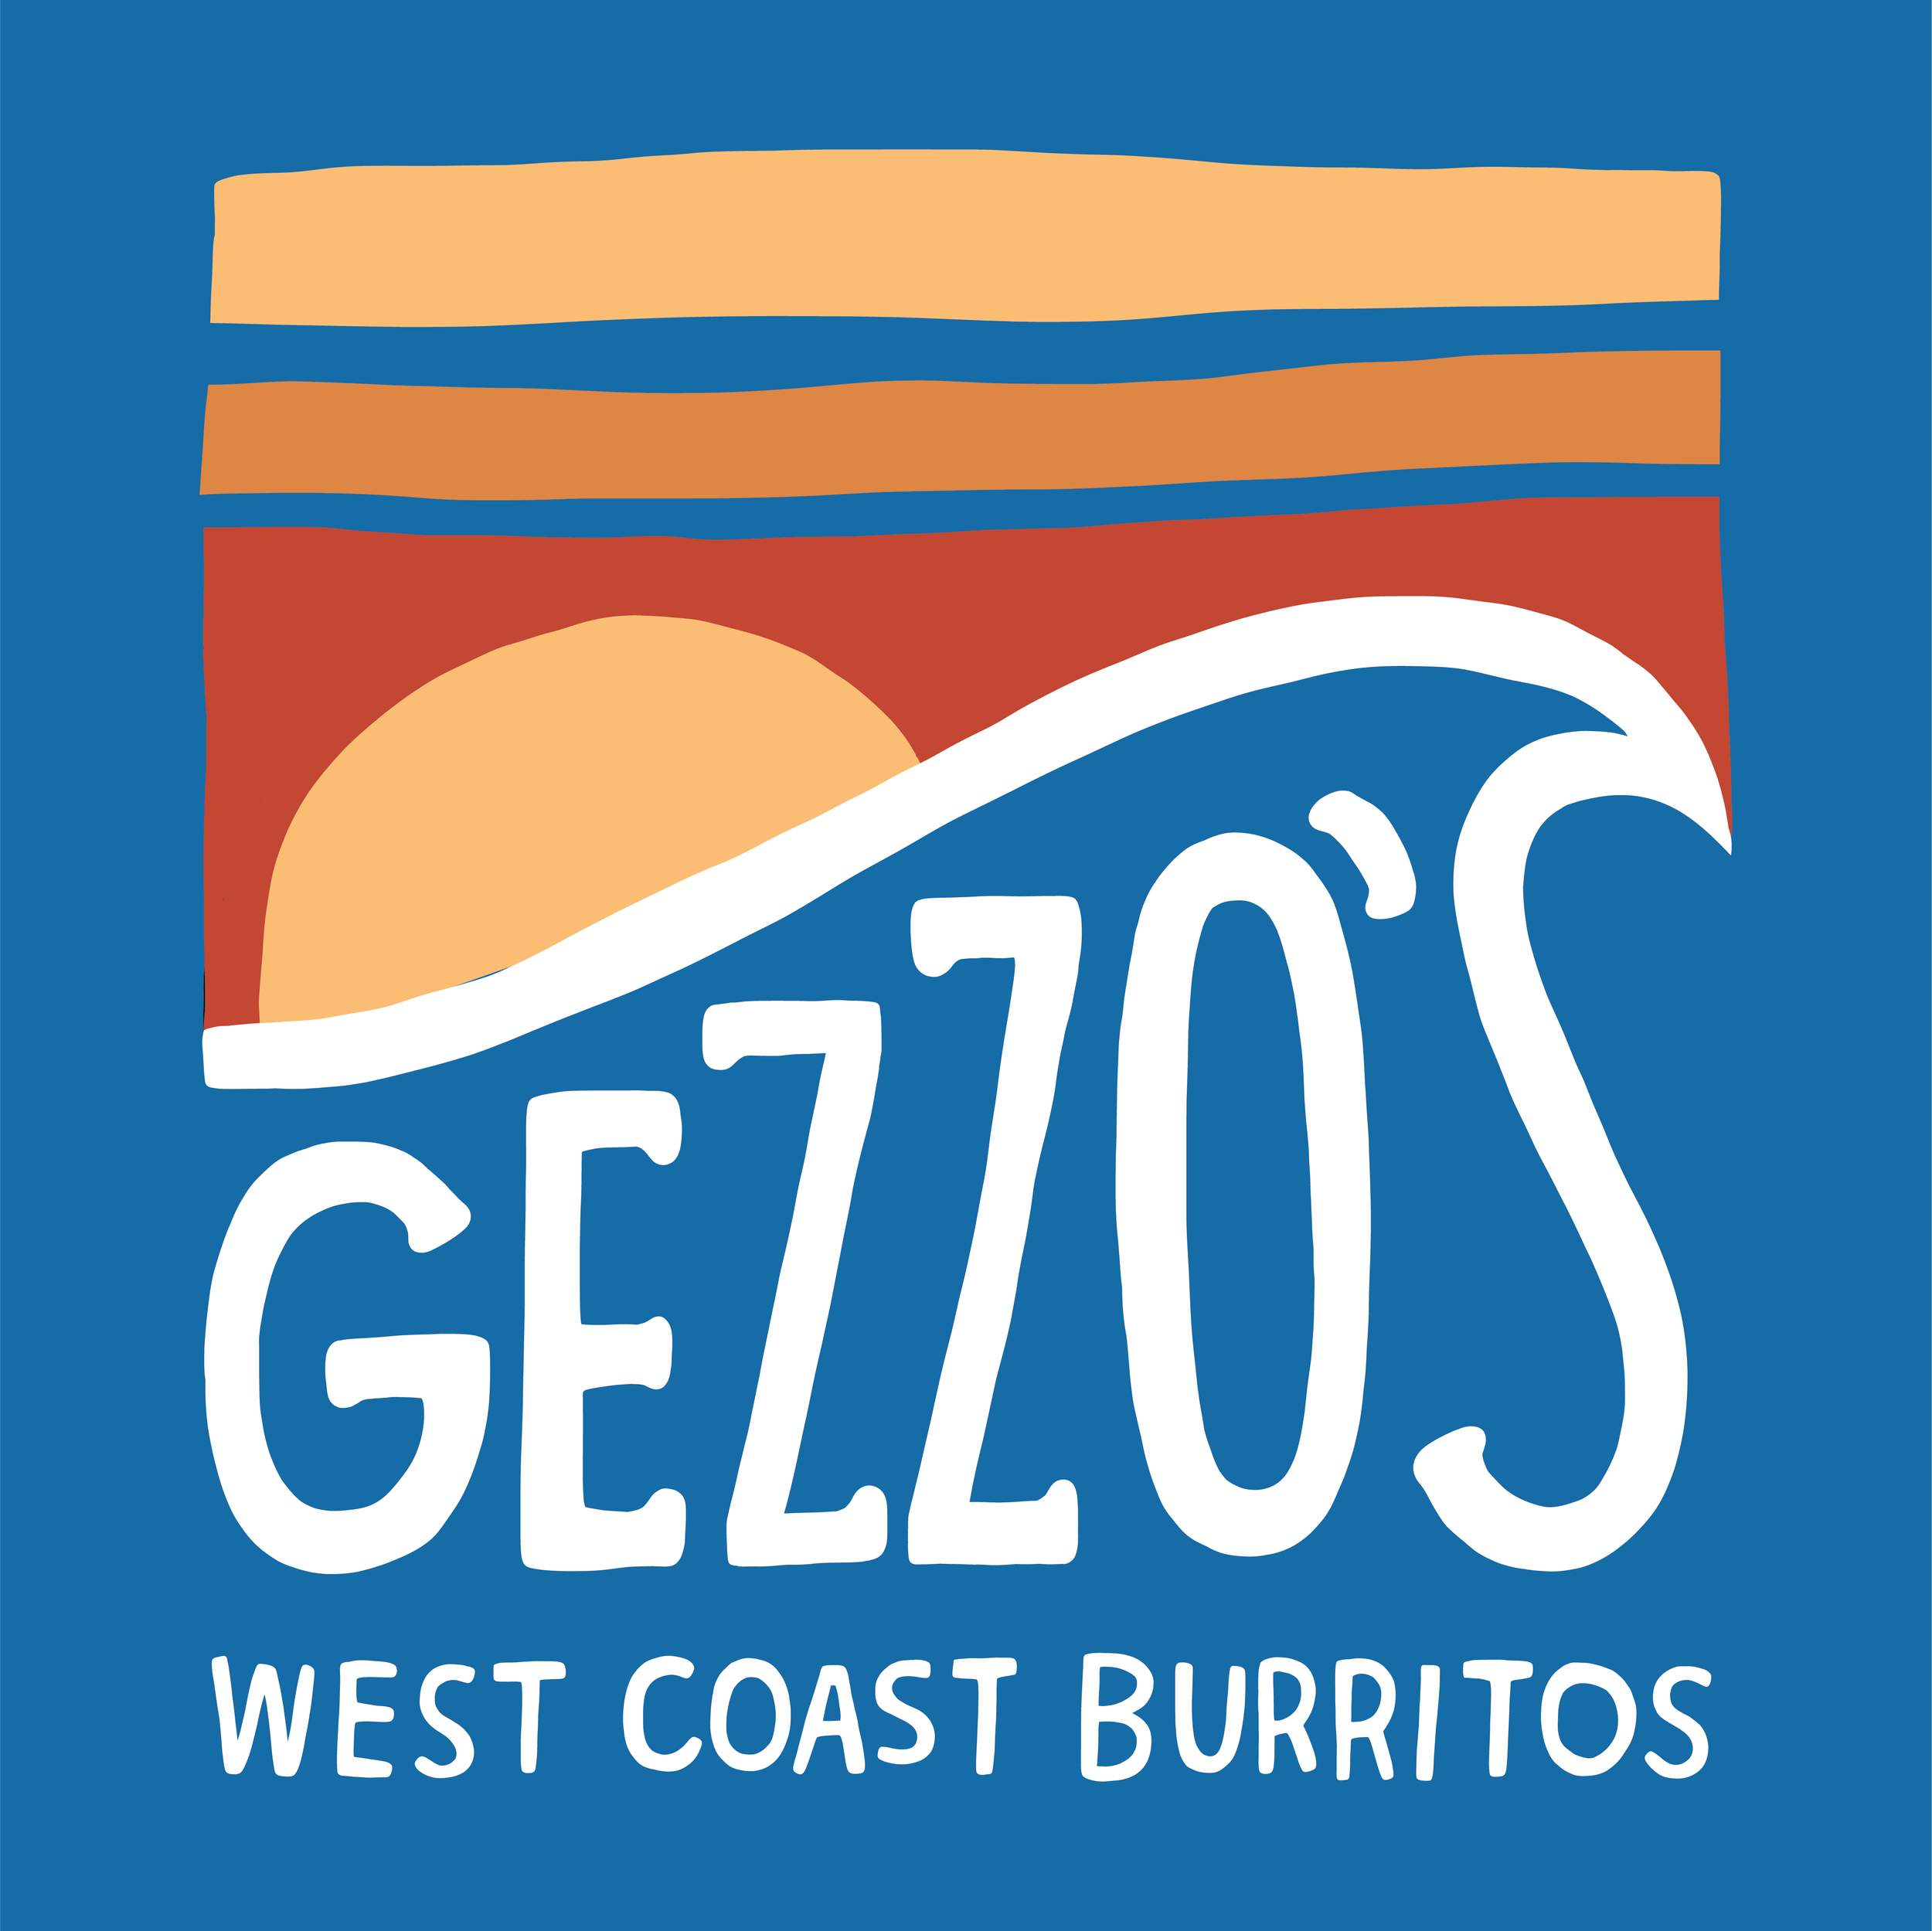 gezzos case study images-01.png